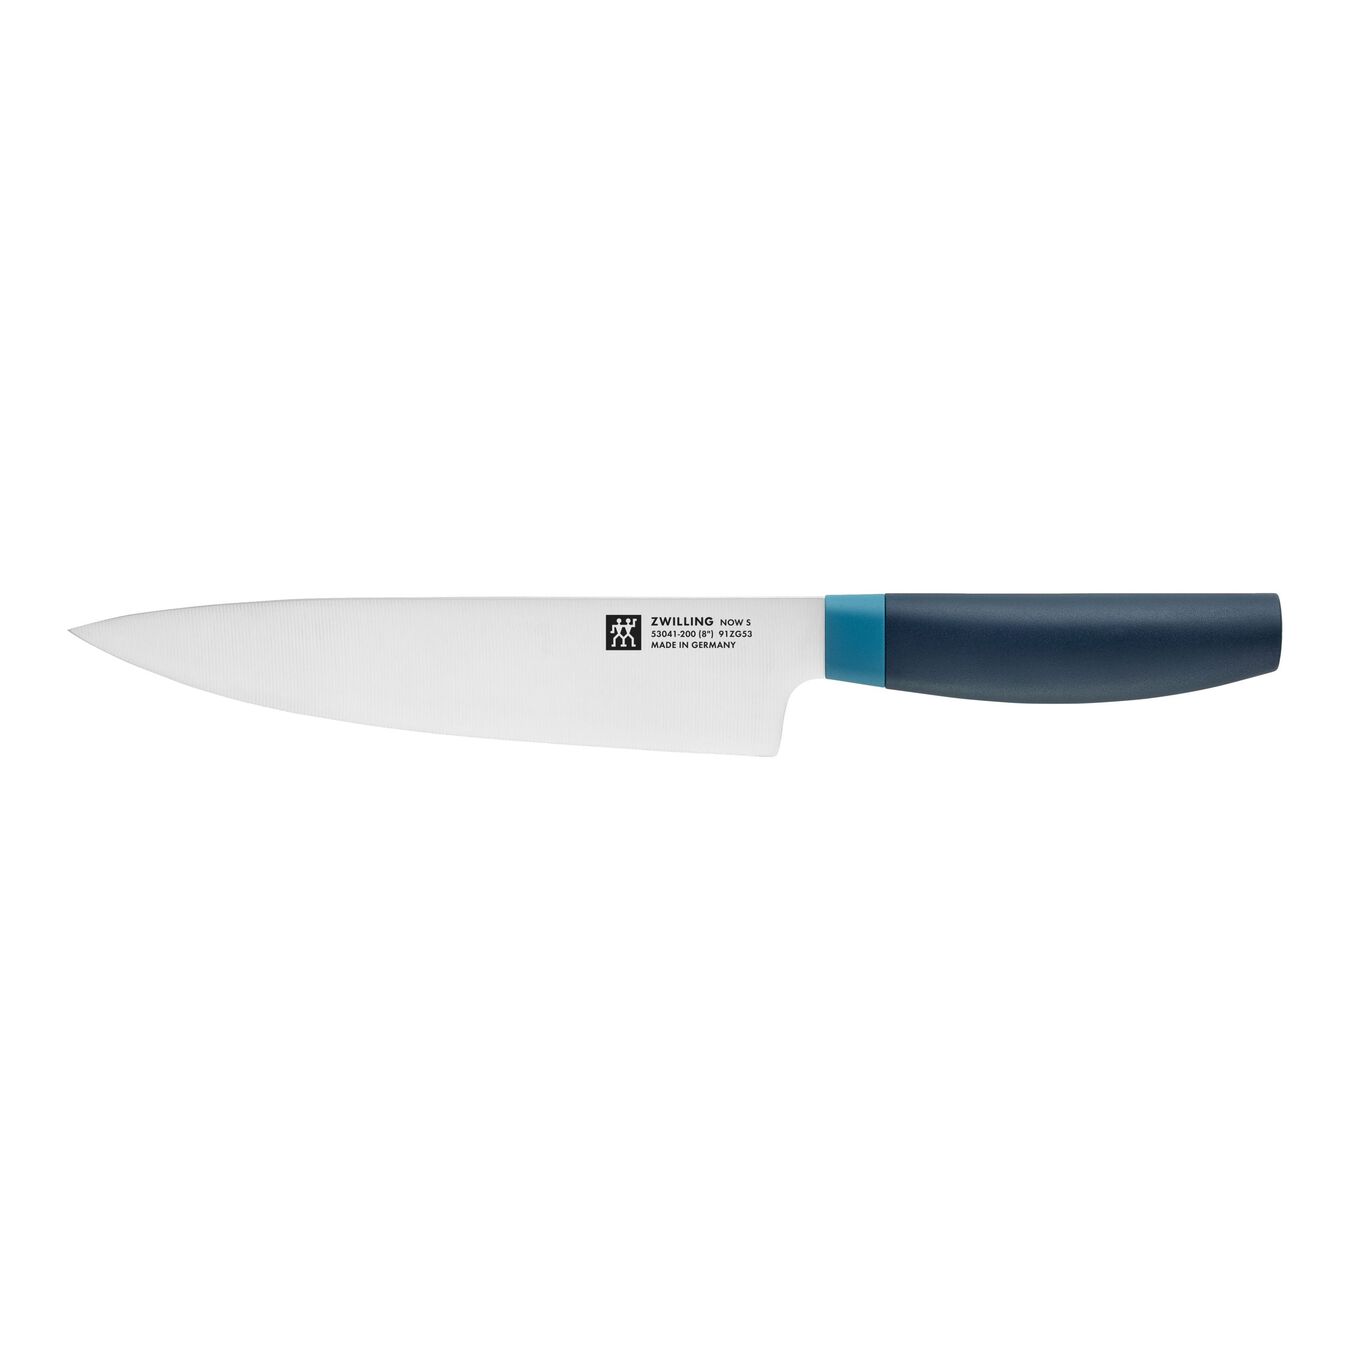 8 inch Chef's knife - Visual Imperfections,,large 1